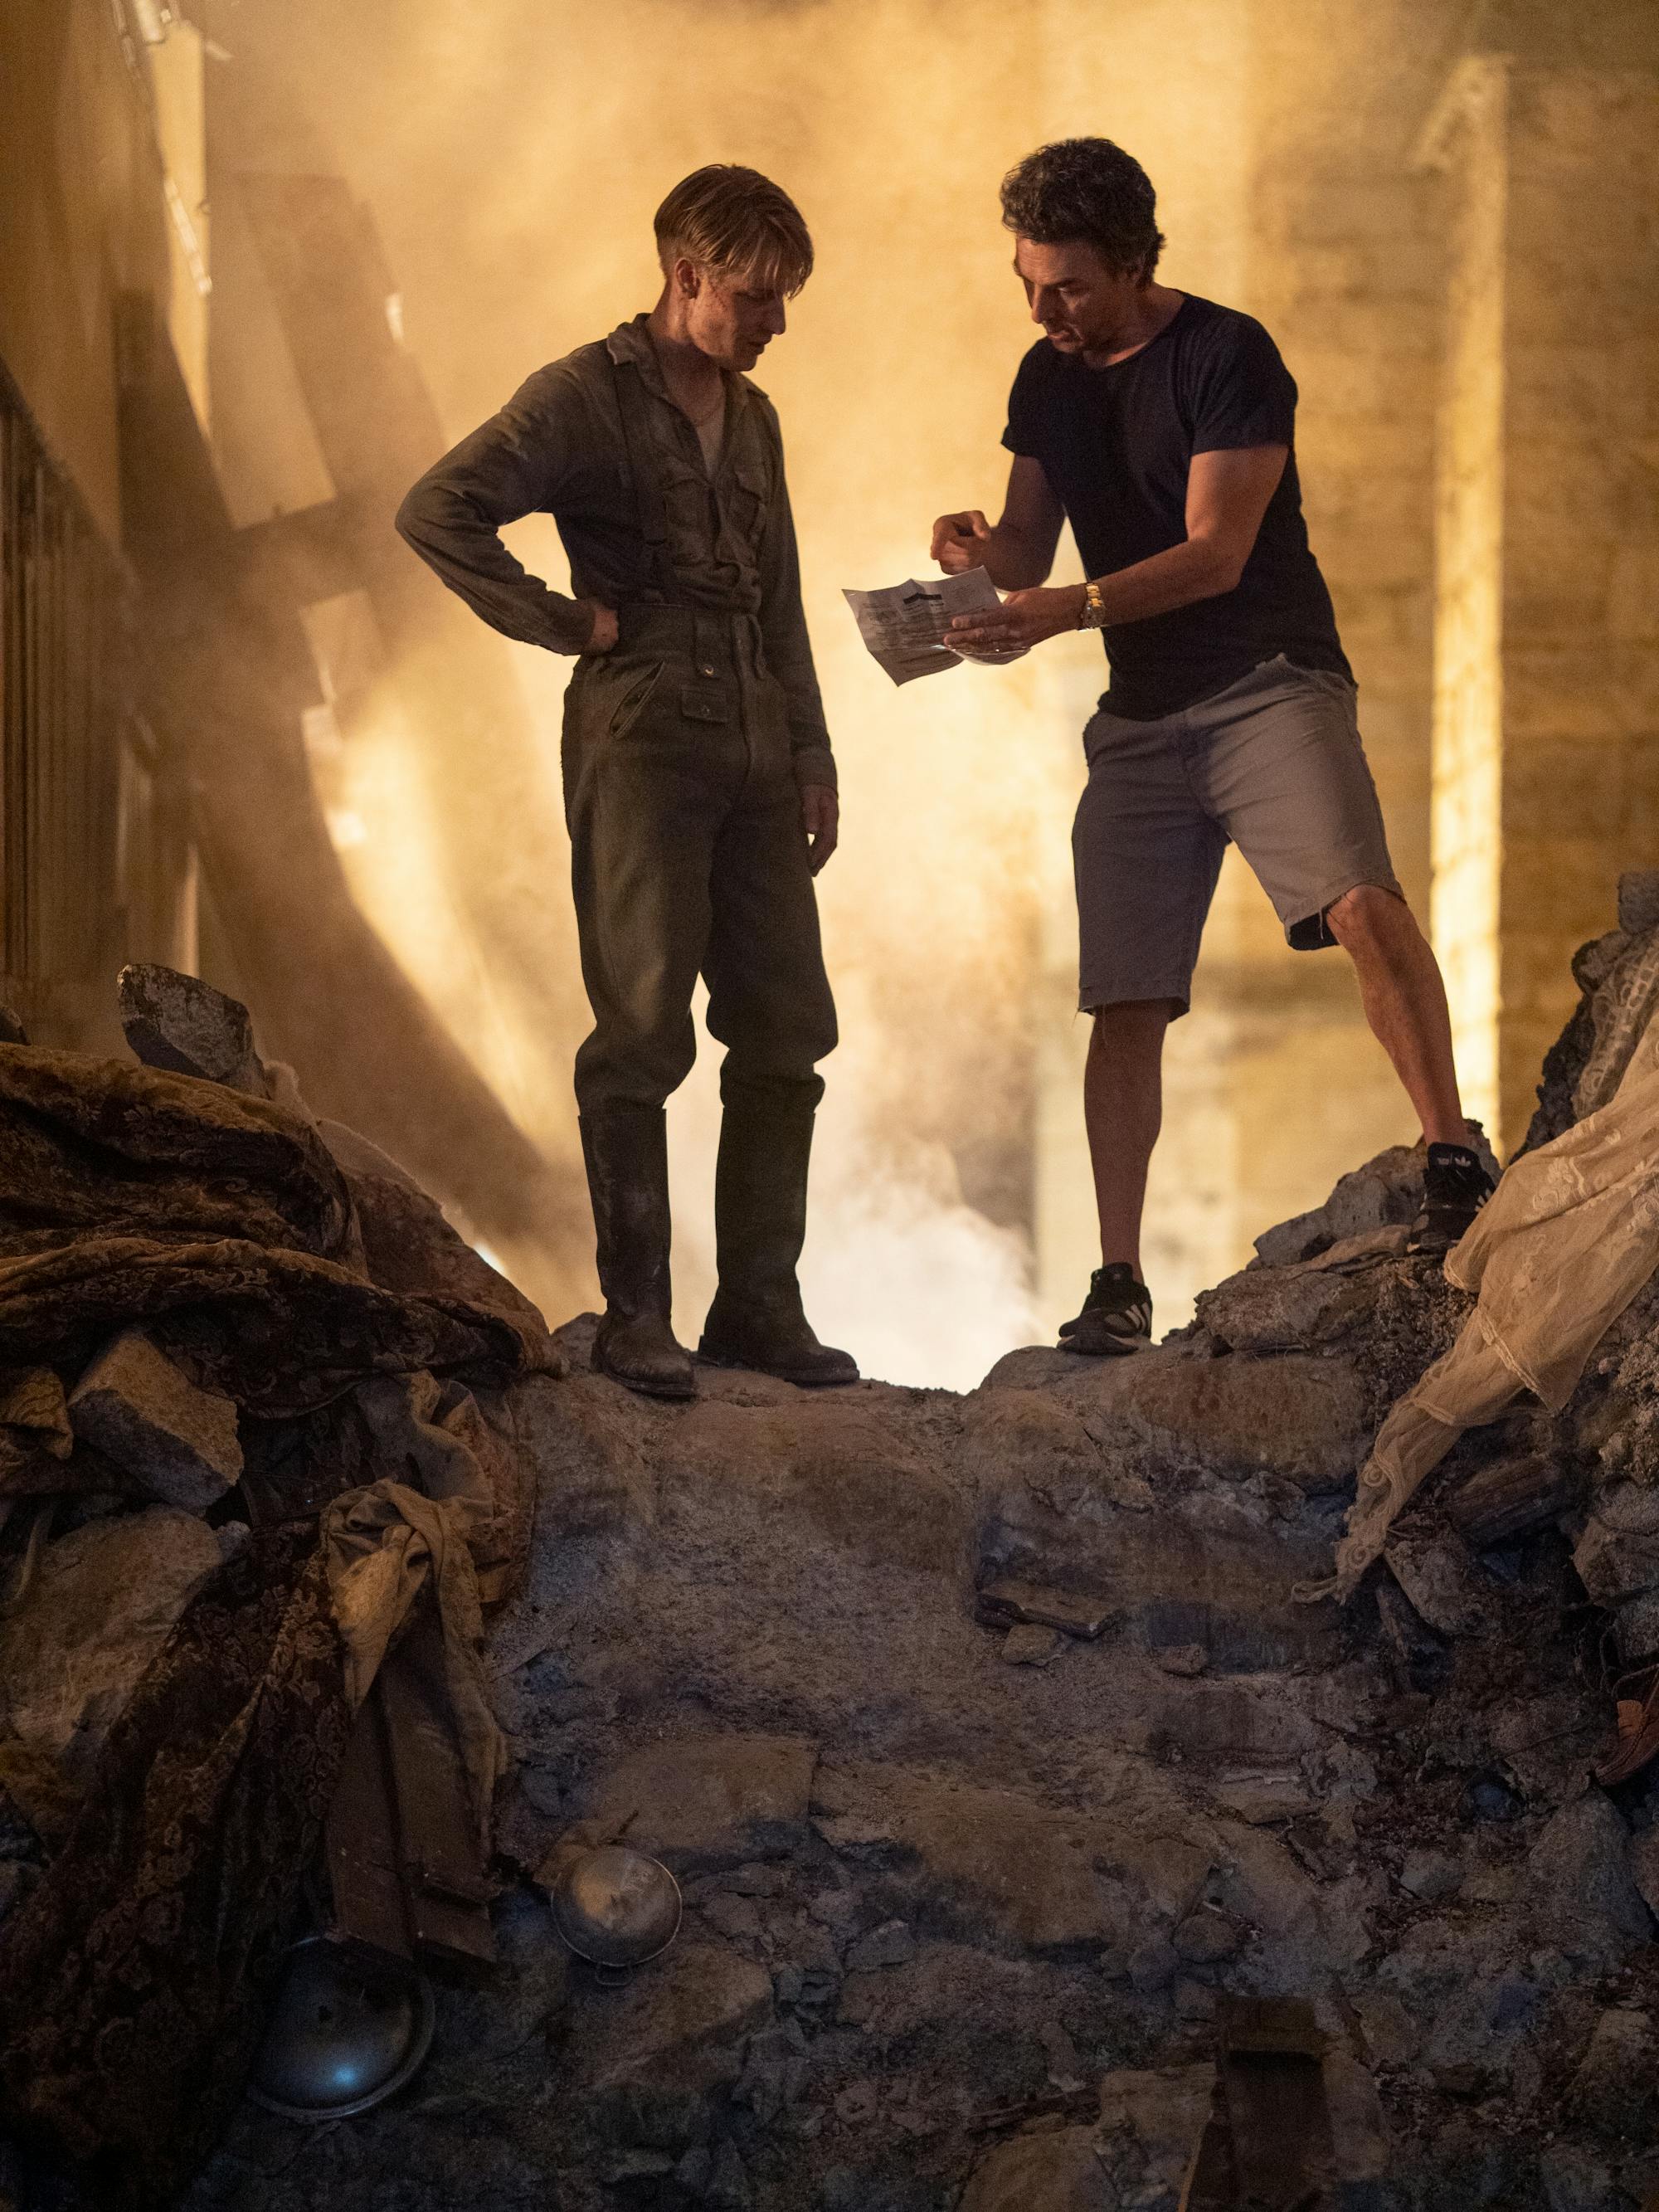 Louis Hofmann and Shawn Levy behind the scenes on set. The two stand over a dusty, dark, rocky slide.